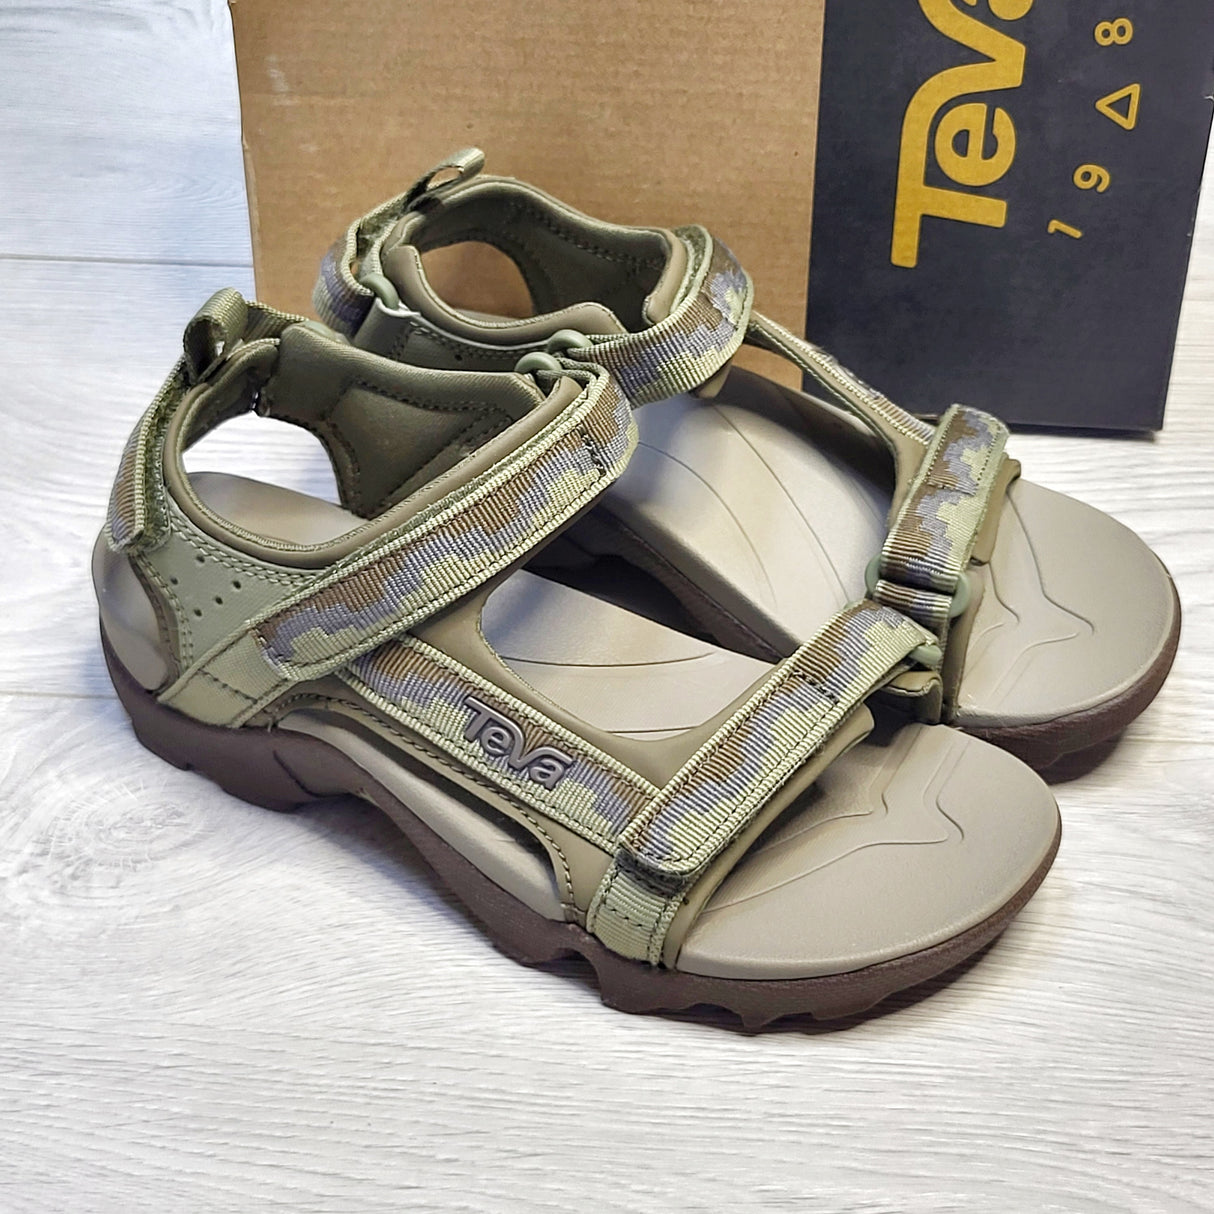 ANHA1 - NEW - Teva "Tanza" sandals, youth size 2